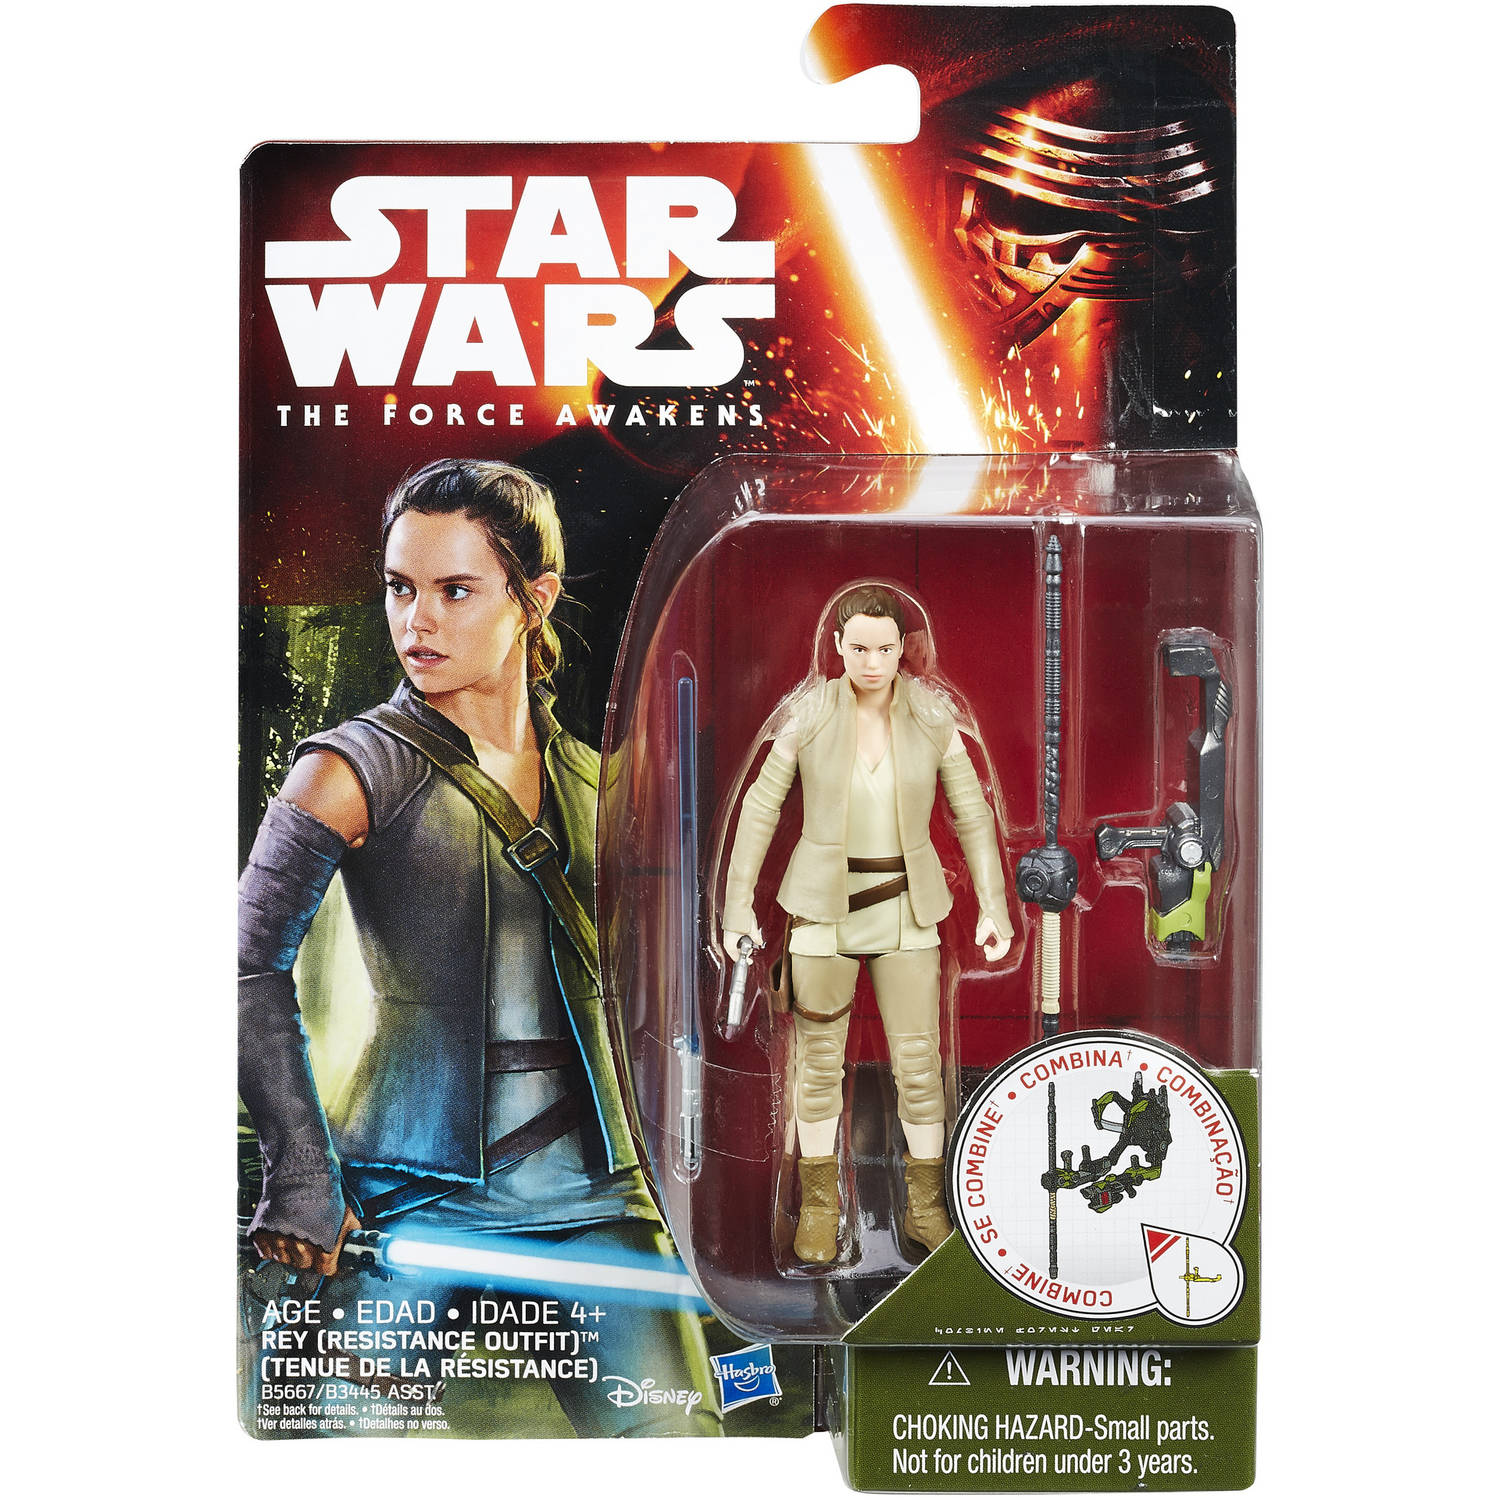 Star Wars Episode VII - 3.75" Rey (Resistance Outfit) Figure by Disney/Hasbro - image 2 of 2